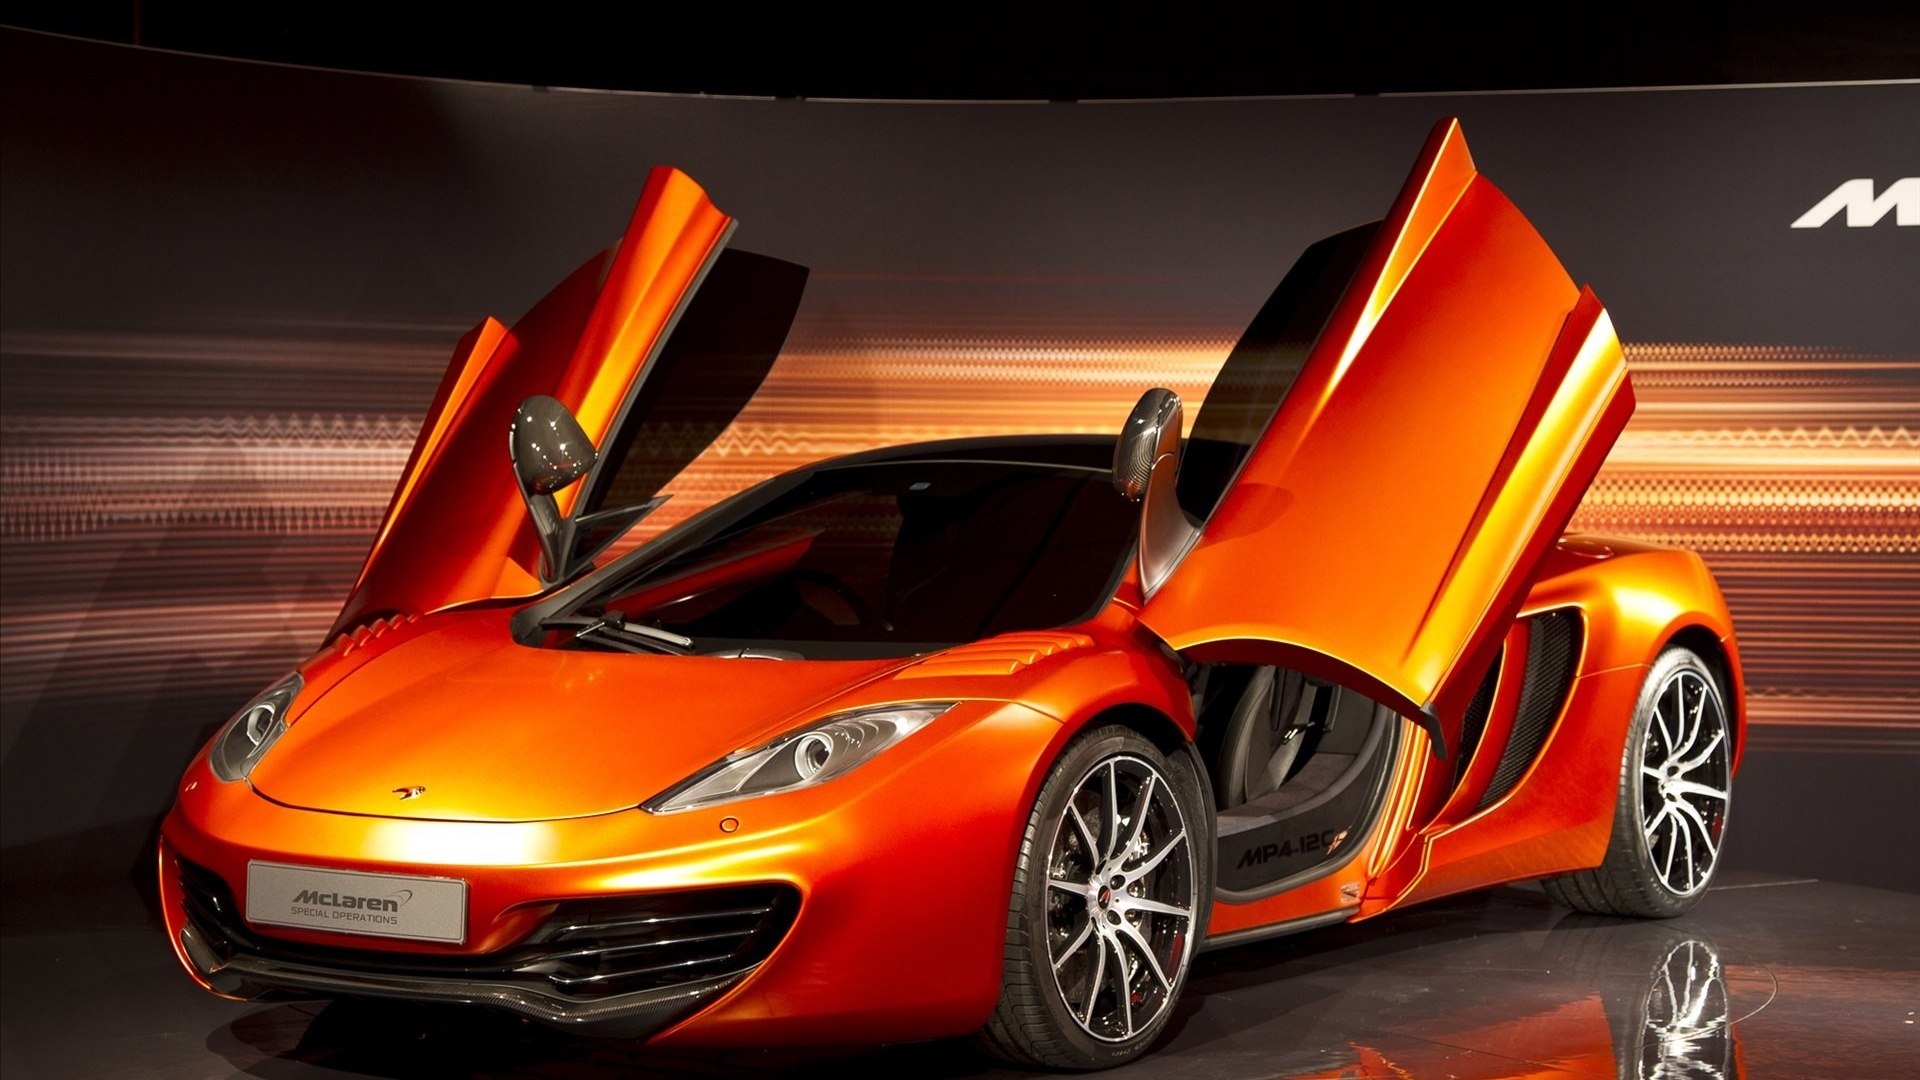 You can download wallpaper Pictures Car Mclaren Wallpaper for free here.Finally dont forget to share your opinion using the comment form below.